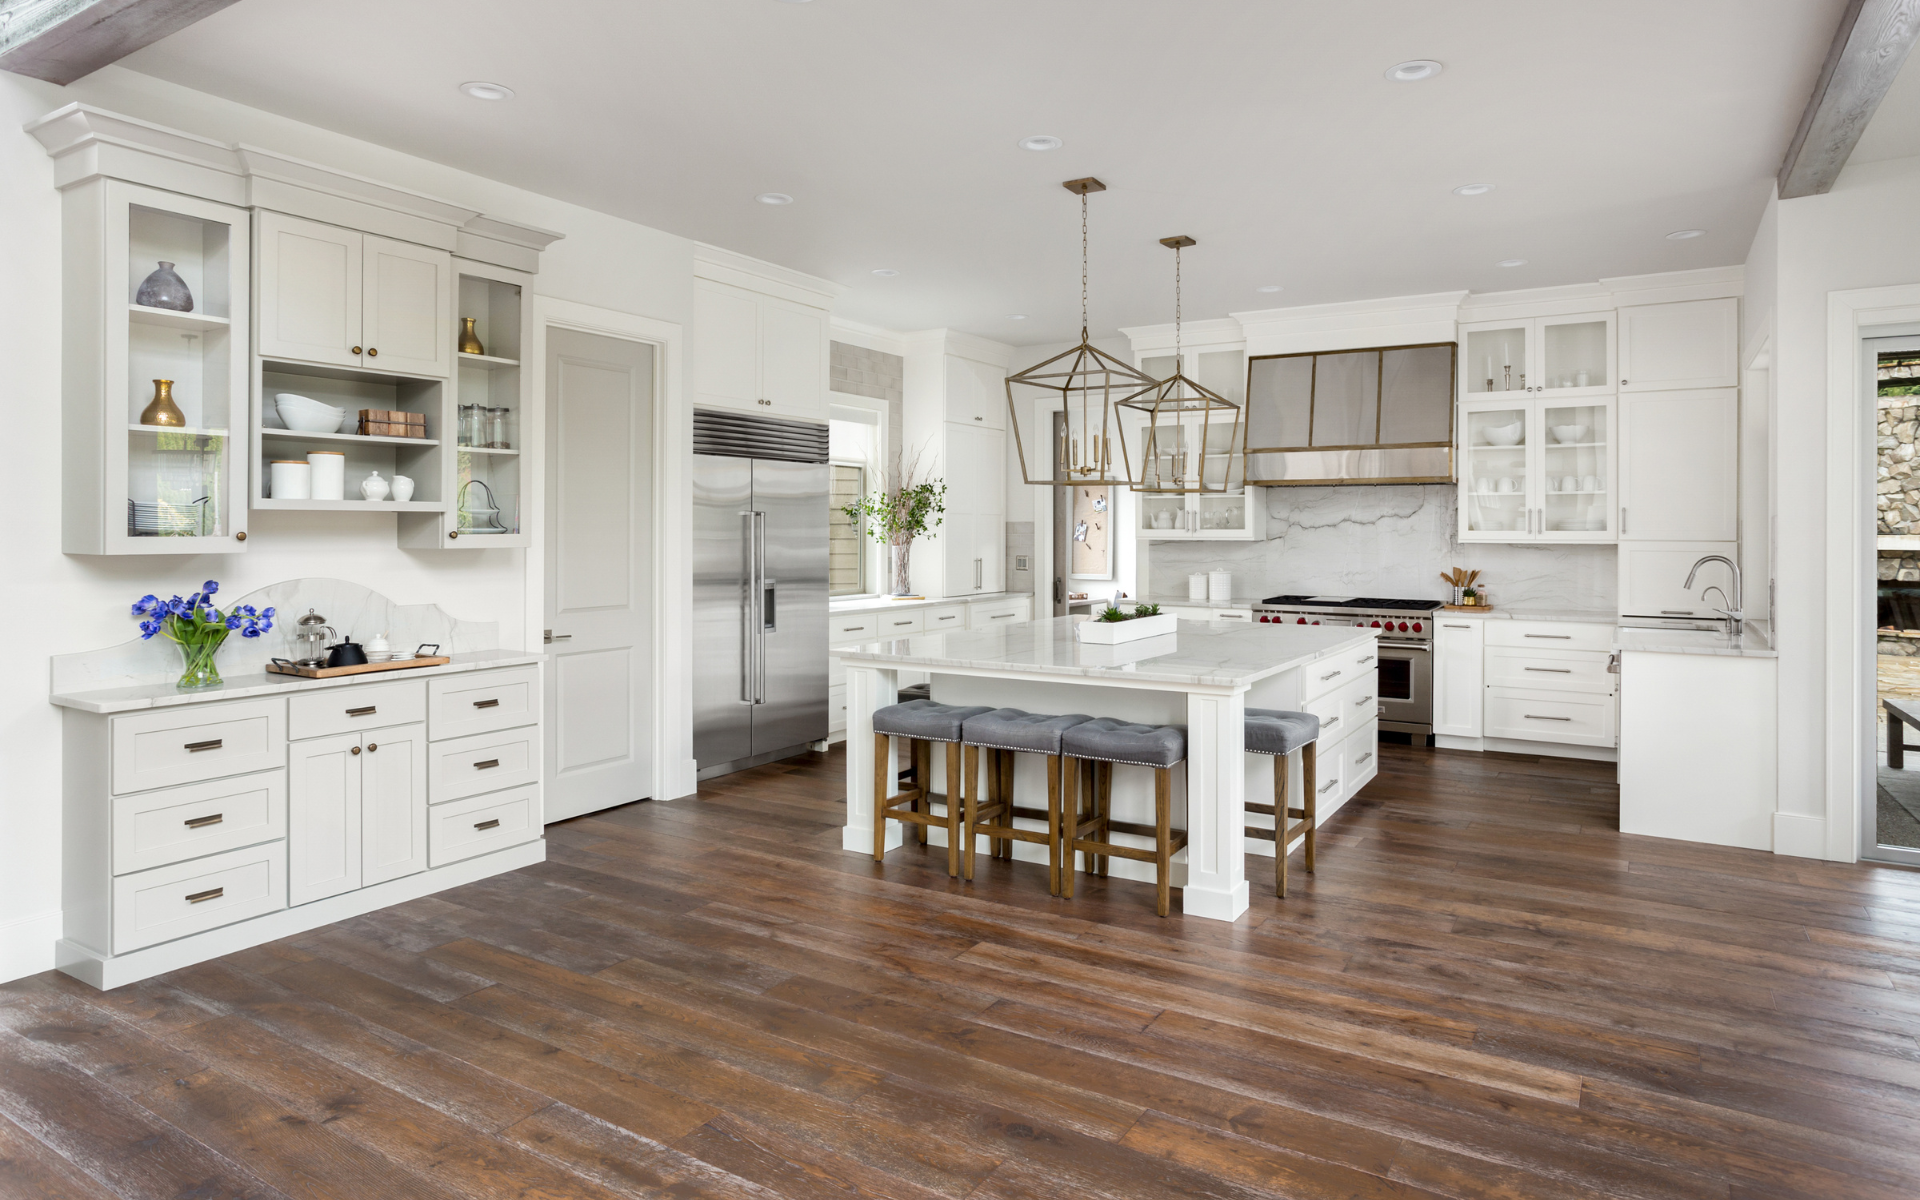 Spacious kitchen with white shaker cabinets and brown flooring